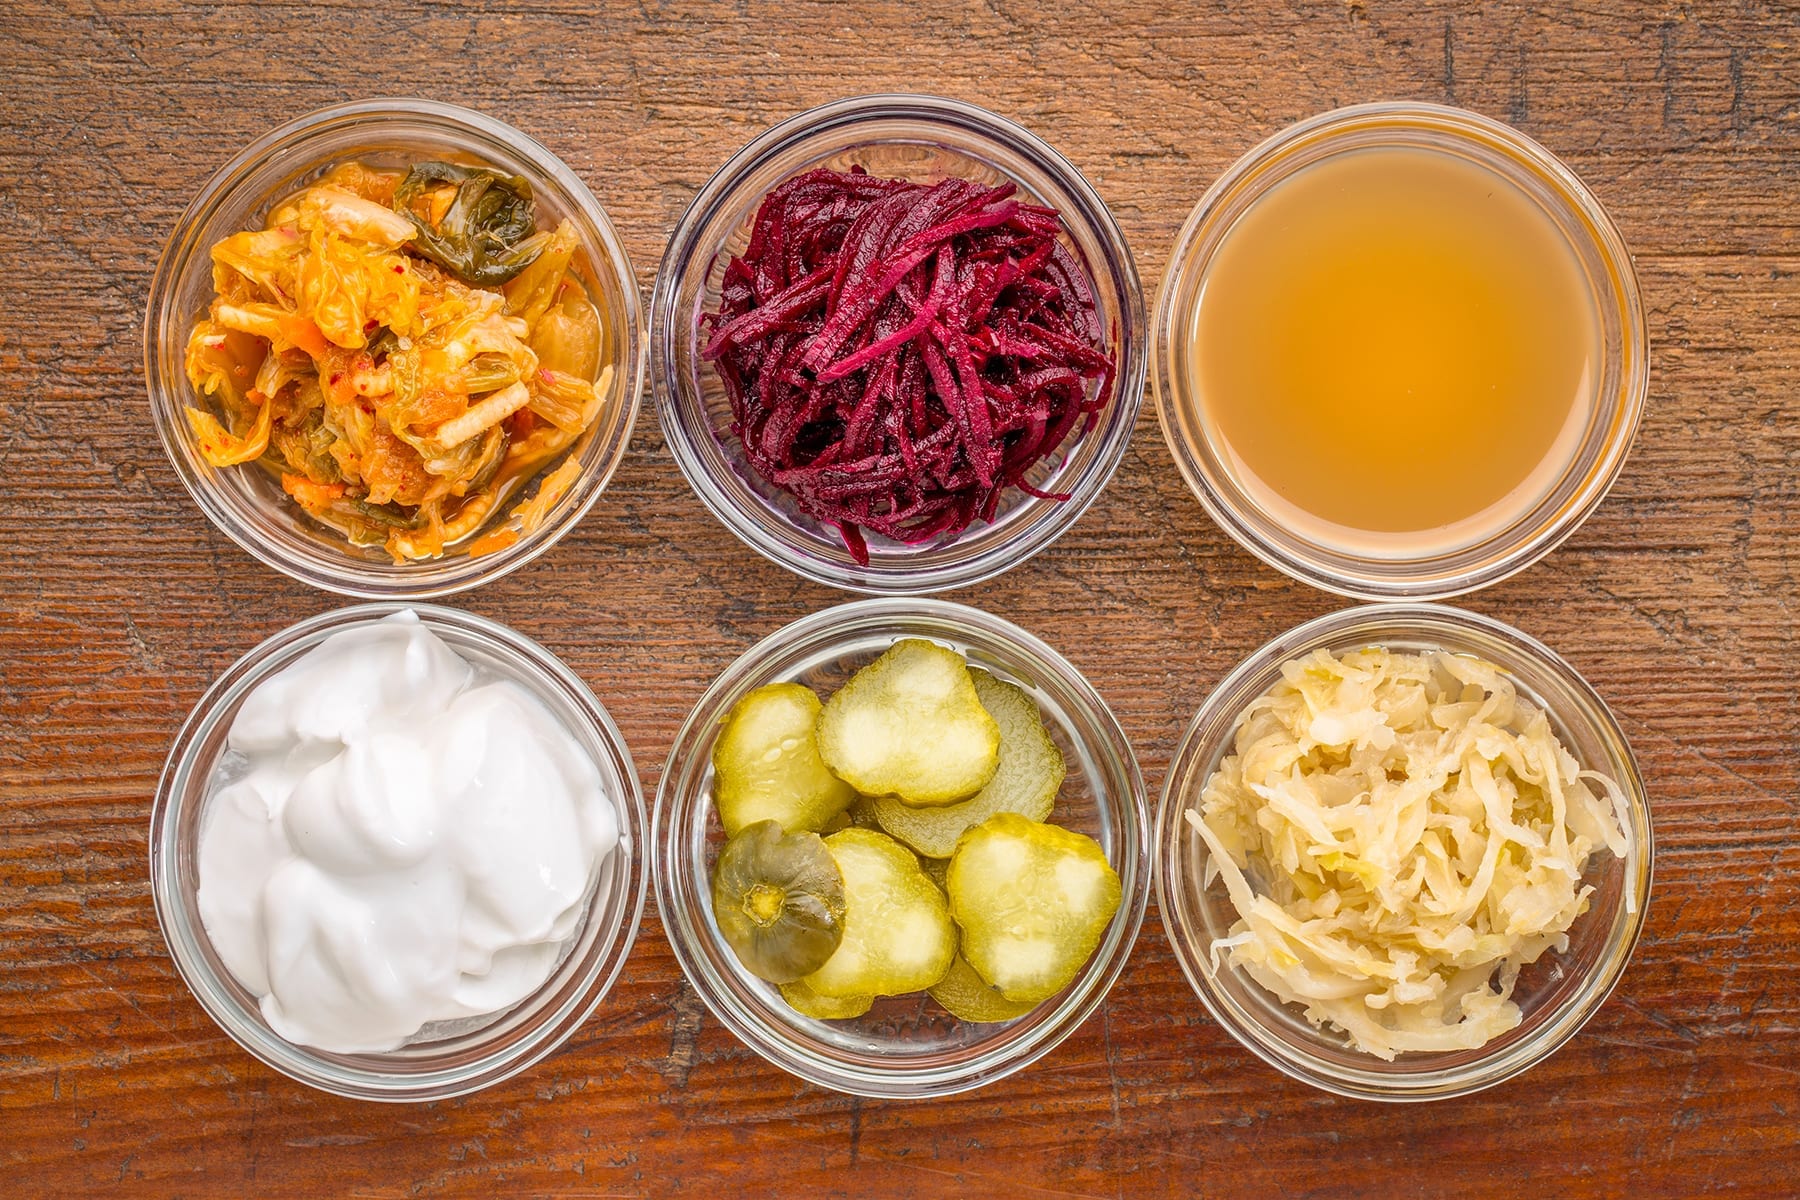 Fermented Foods For Gut Health